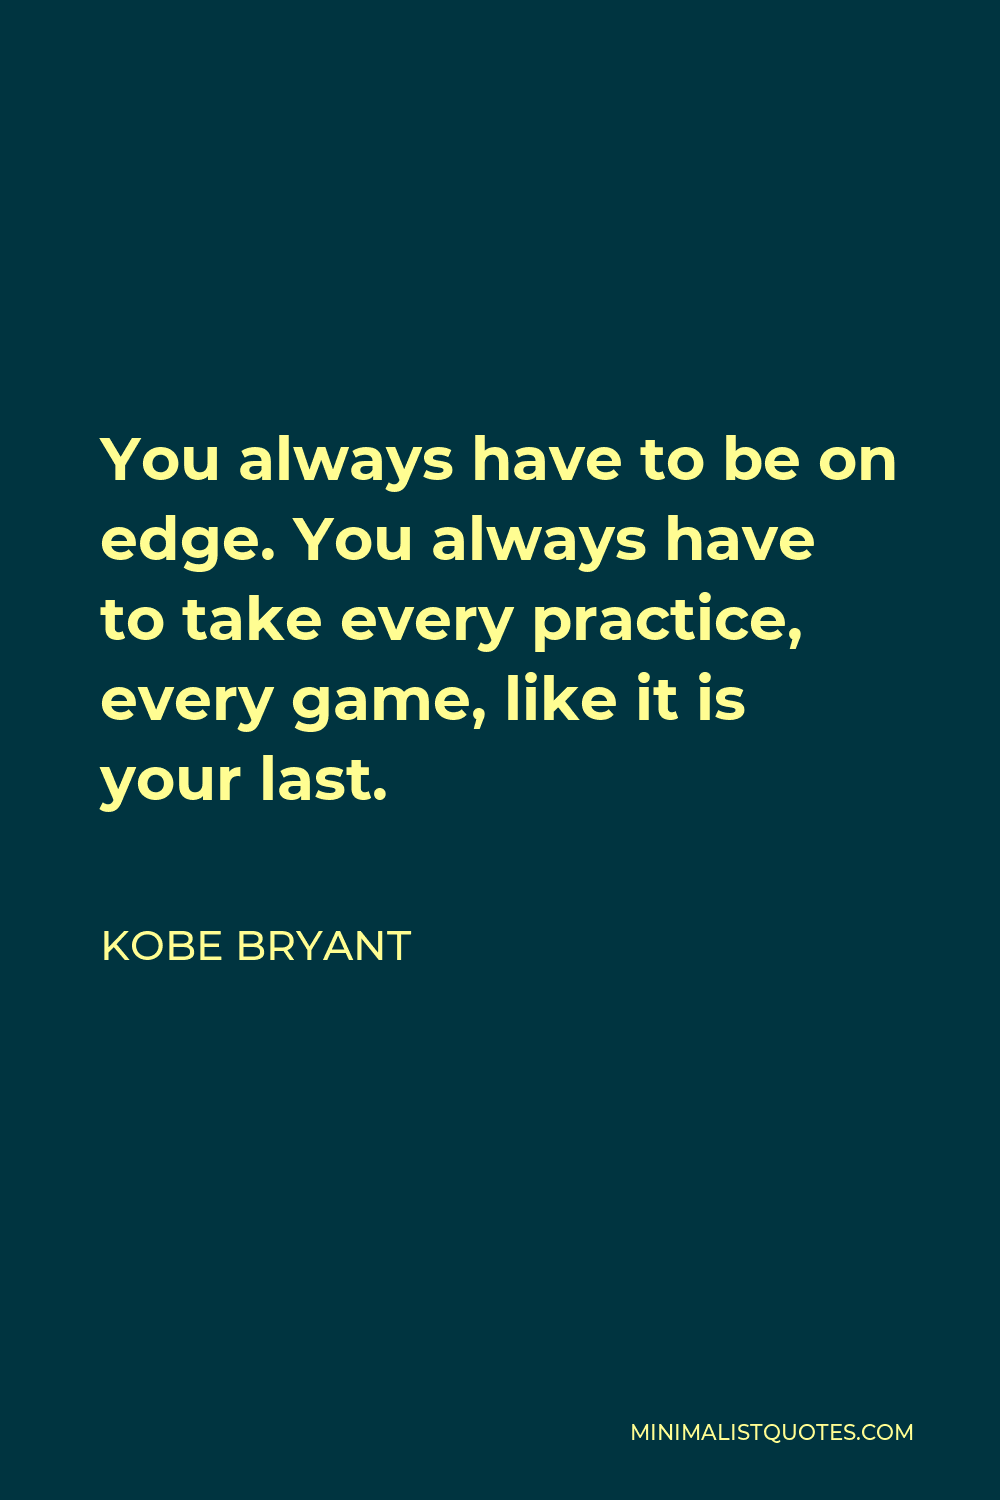 Kobe Bryant Quote - You always have to be on edge. You always have to take every practice, every game, like it is your last.